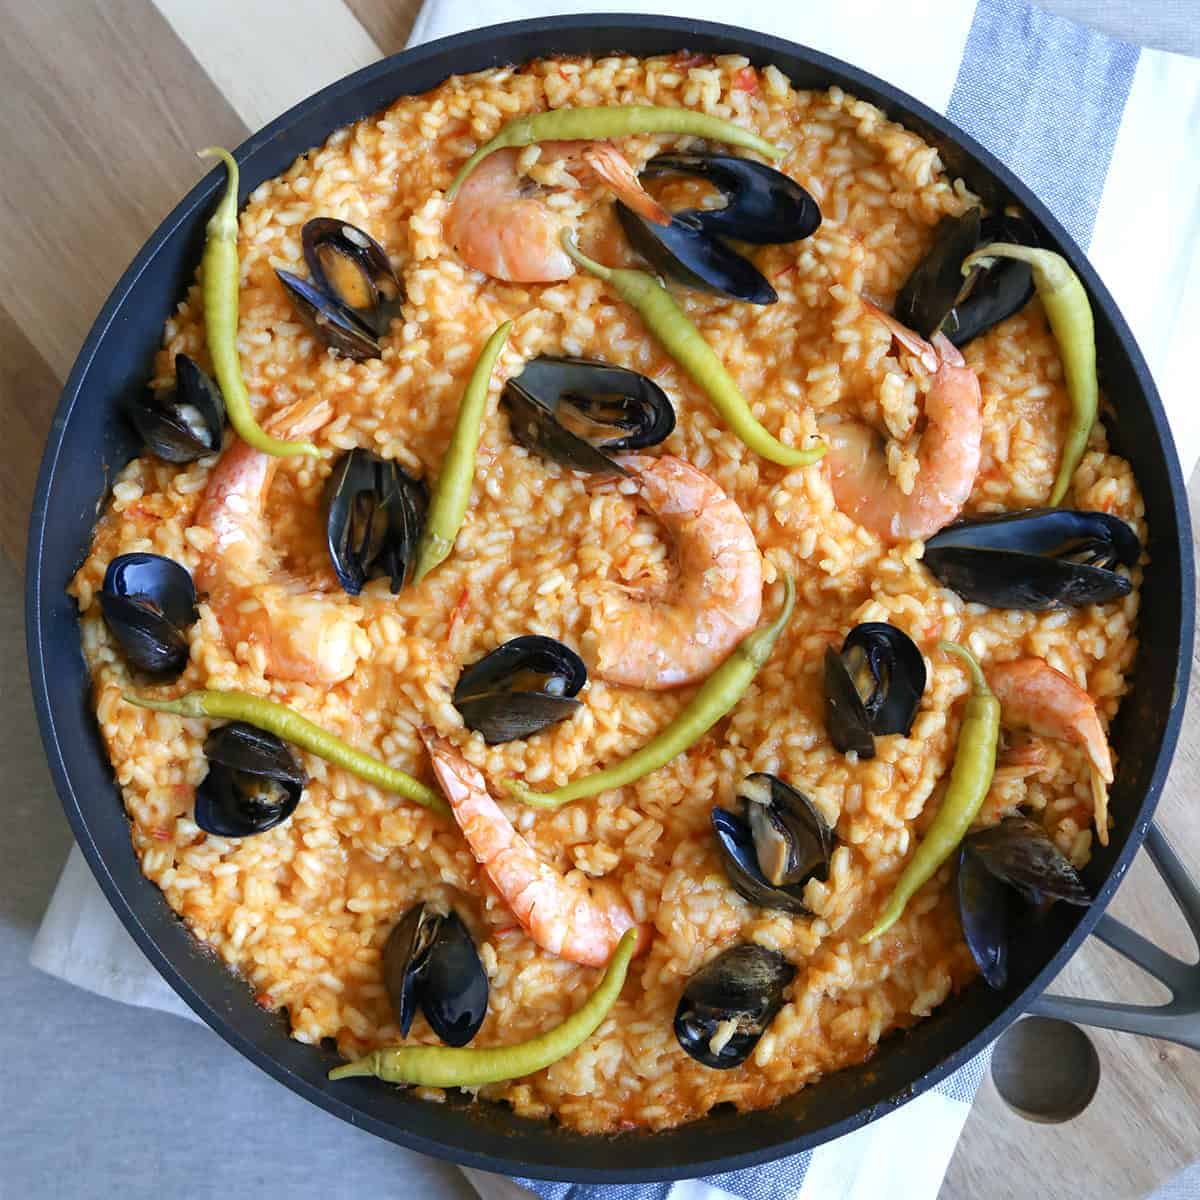 https://www.giftofhospitality.com/wp-content/uploads/2017/05/seafood-paella.jpg